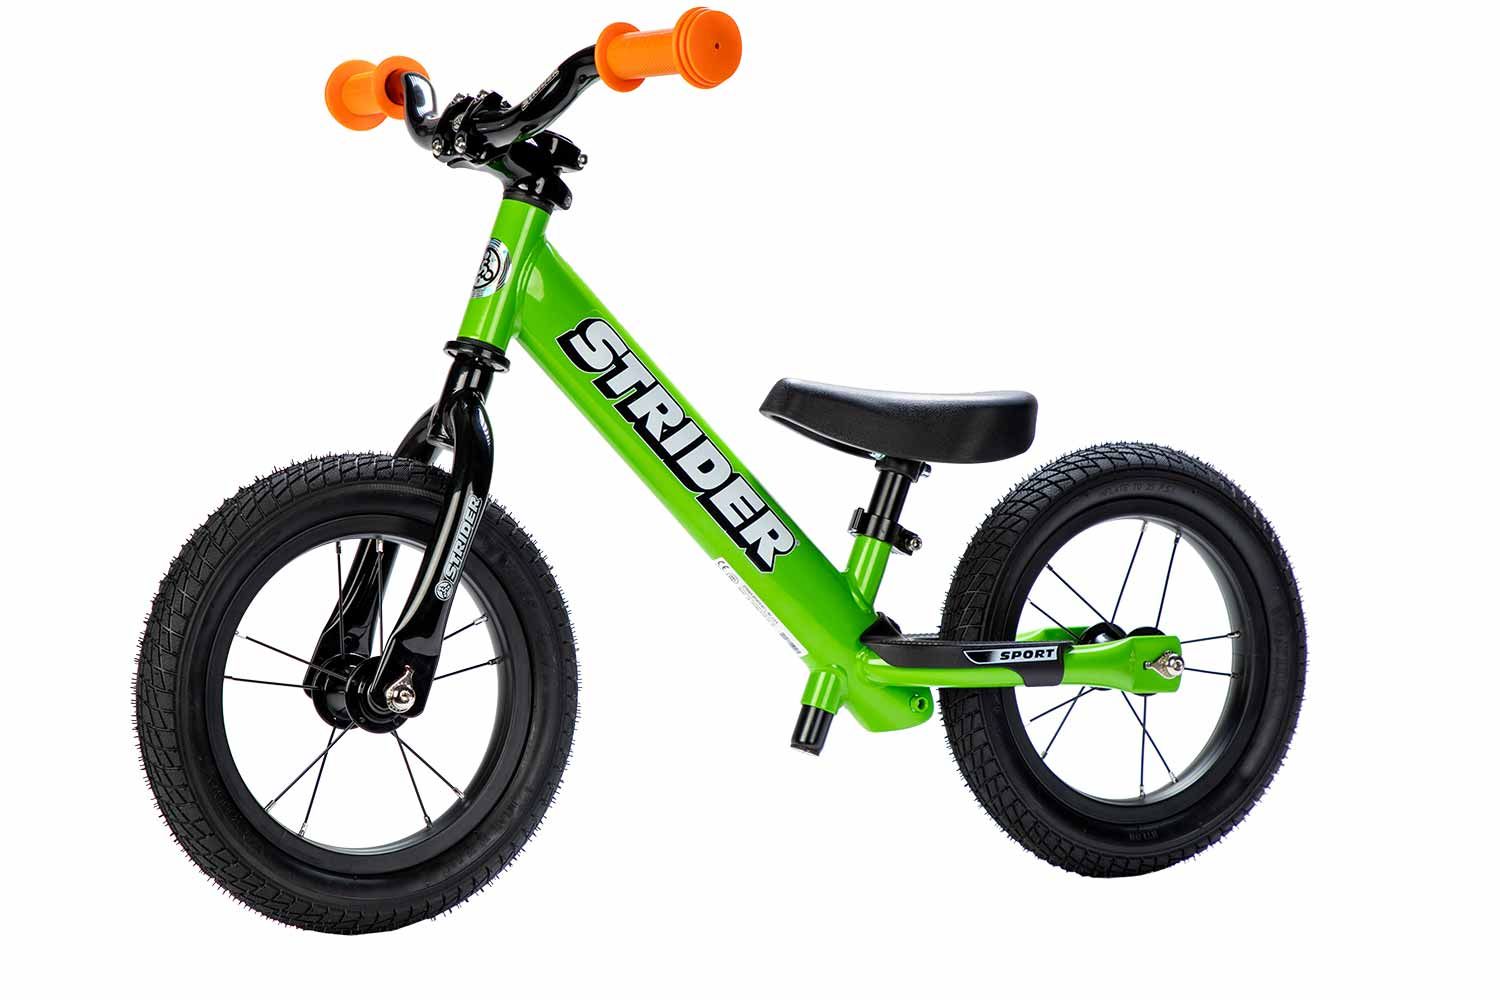 The Trailblazer Strider Custom Build, featuring a Green Strider 12 Sport, High Traction Wheels, and assorted accessories